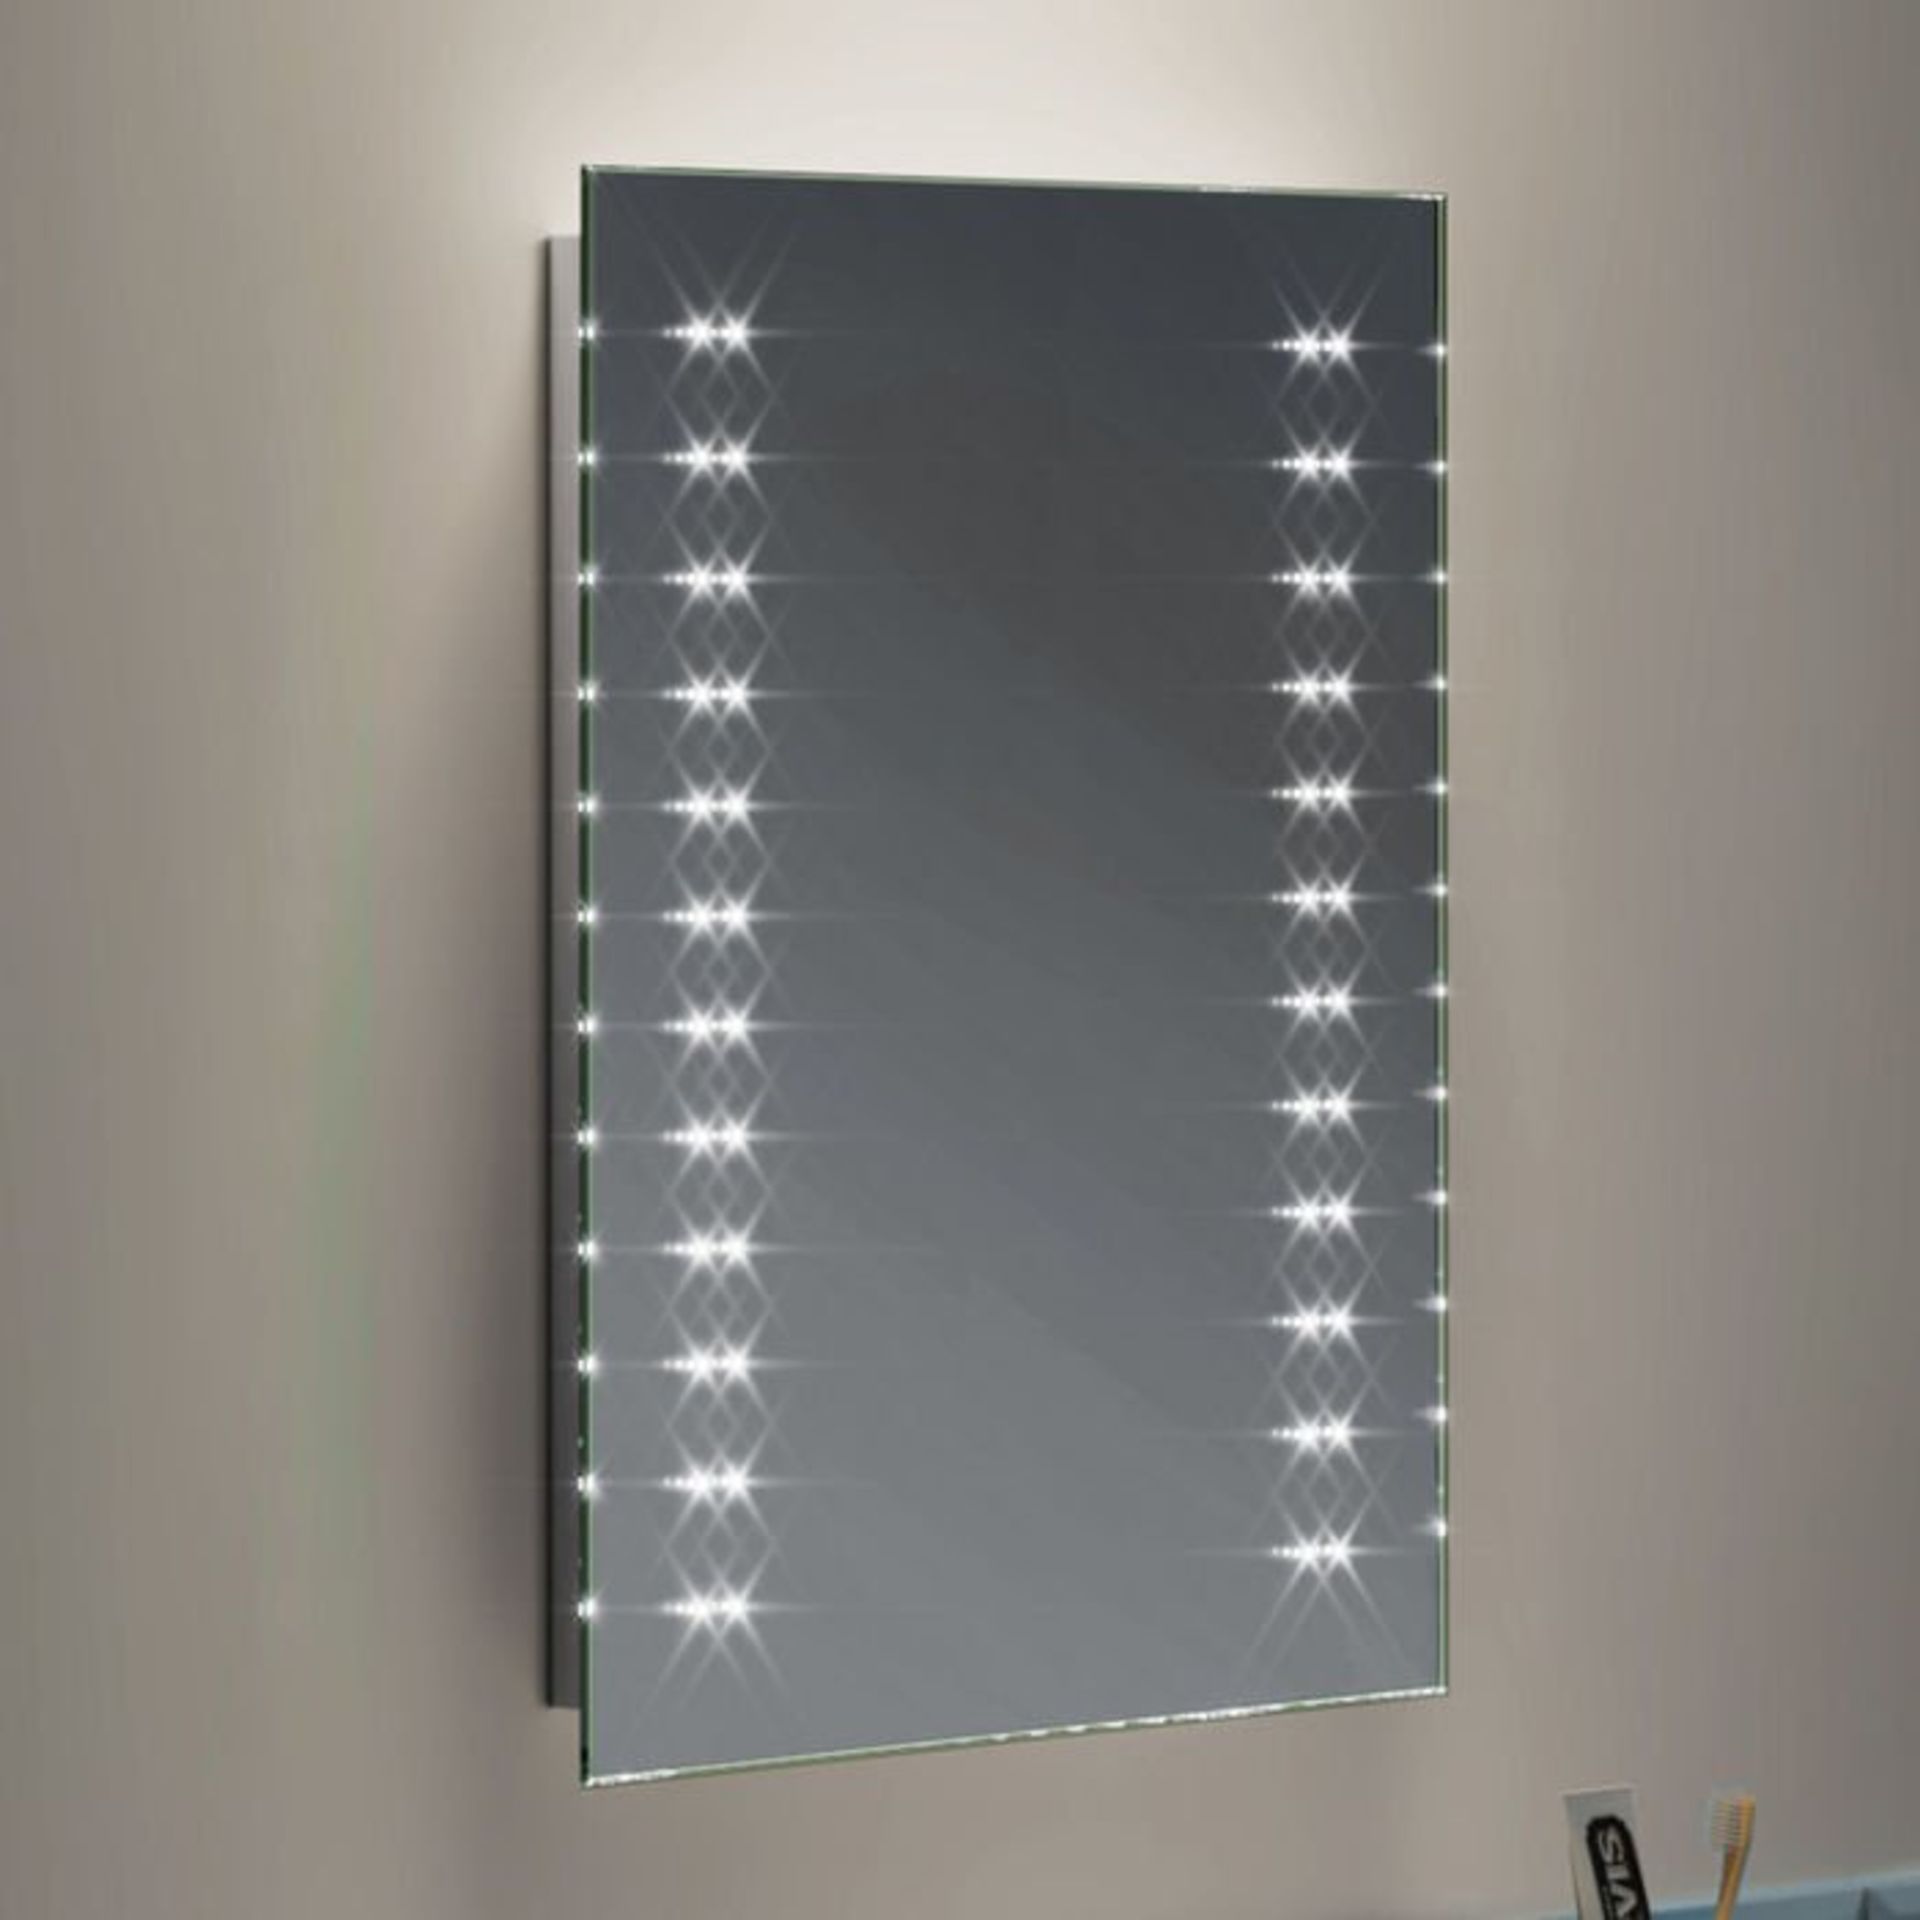 (A202) 390x500mm Galactic LED Mirror - Battery Operated. RRP £249.99. Energy saving controlled